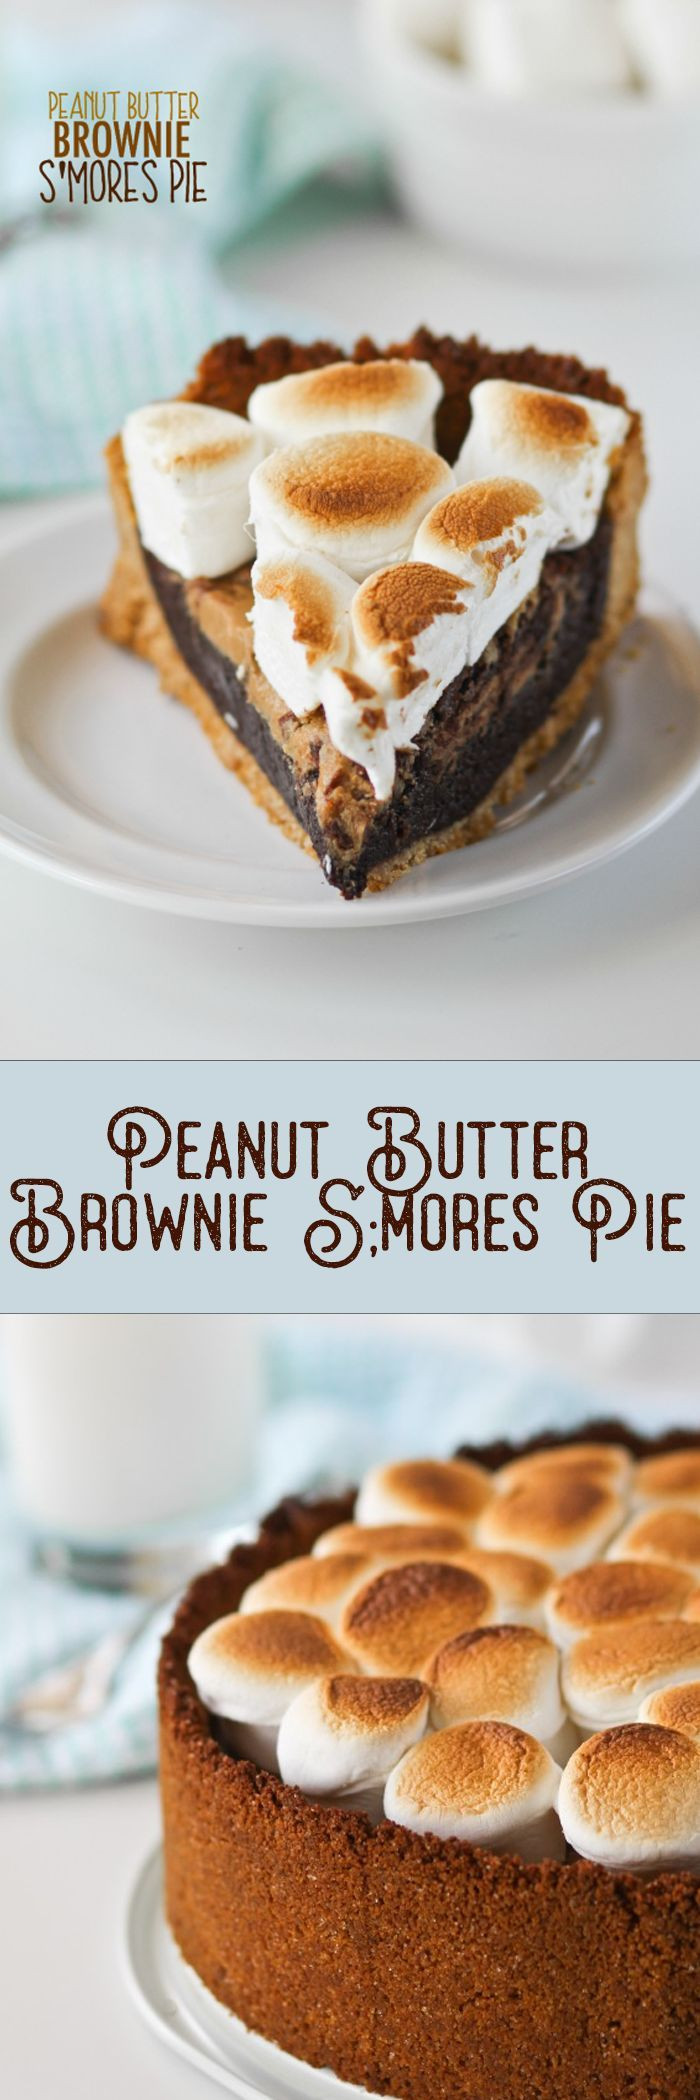 Low Cholesterol Desserts Store Bought
 Peanut Butter S mores Pie this is actually a really